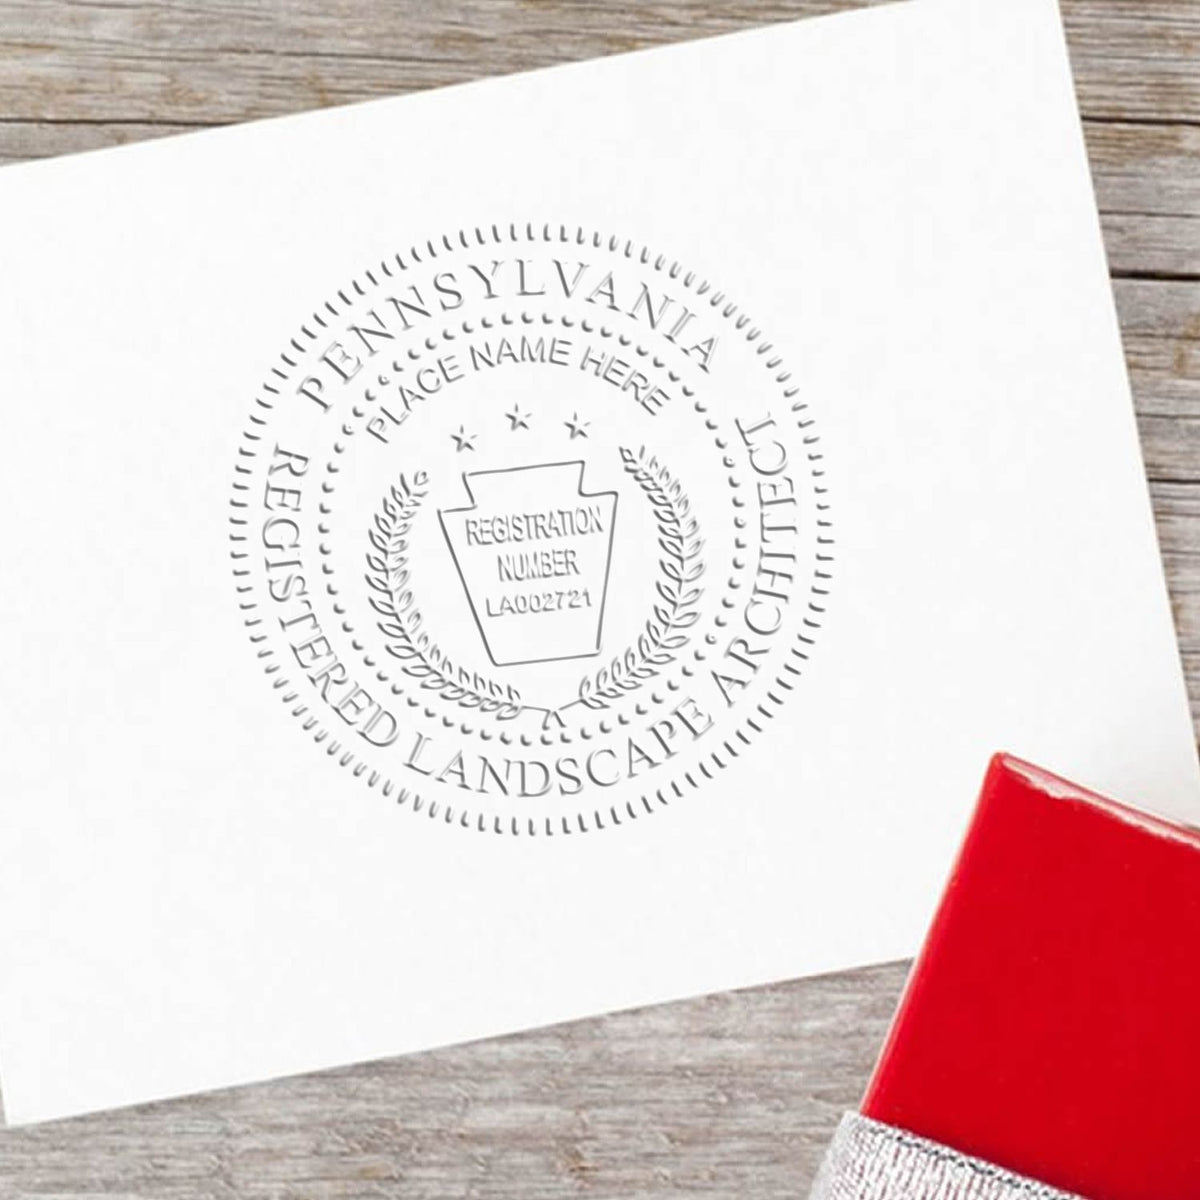 The Gift Pennsylvania Landscape Architect Seal stamp impression comes to life with a crisp, detailed image stamped on paper - showcasing true professional quality.